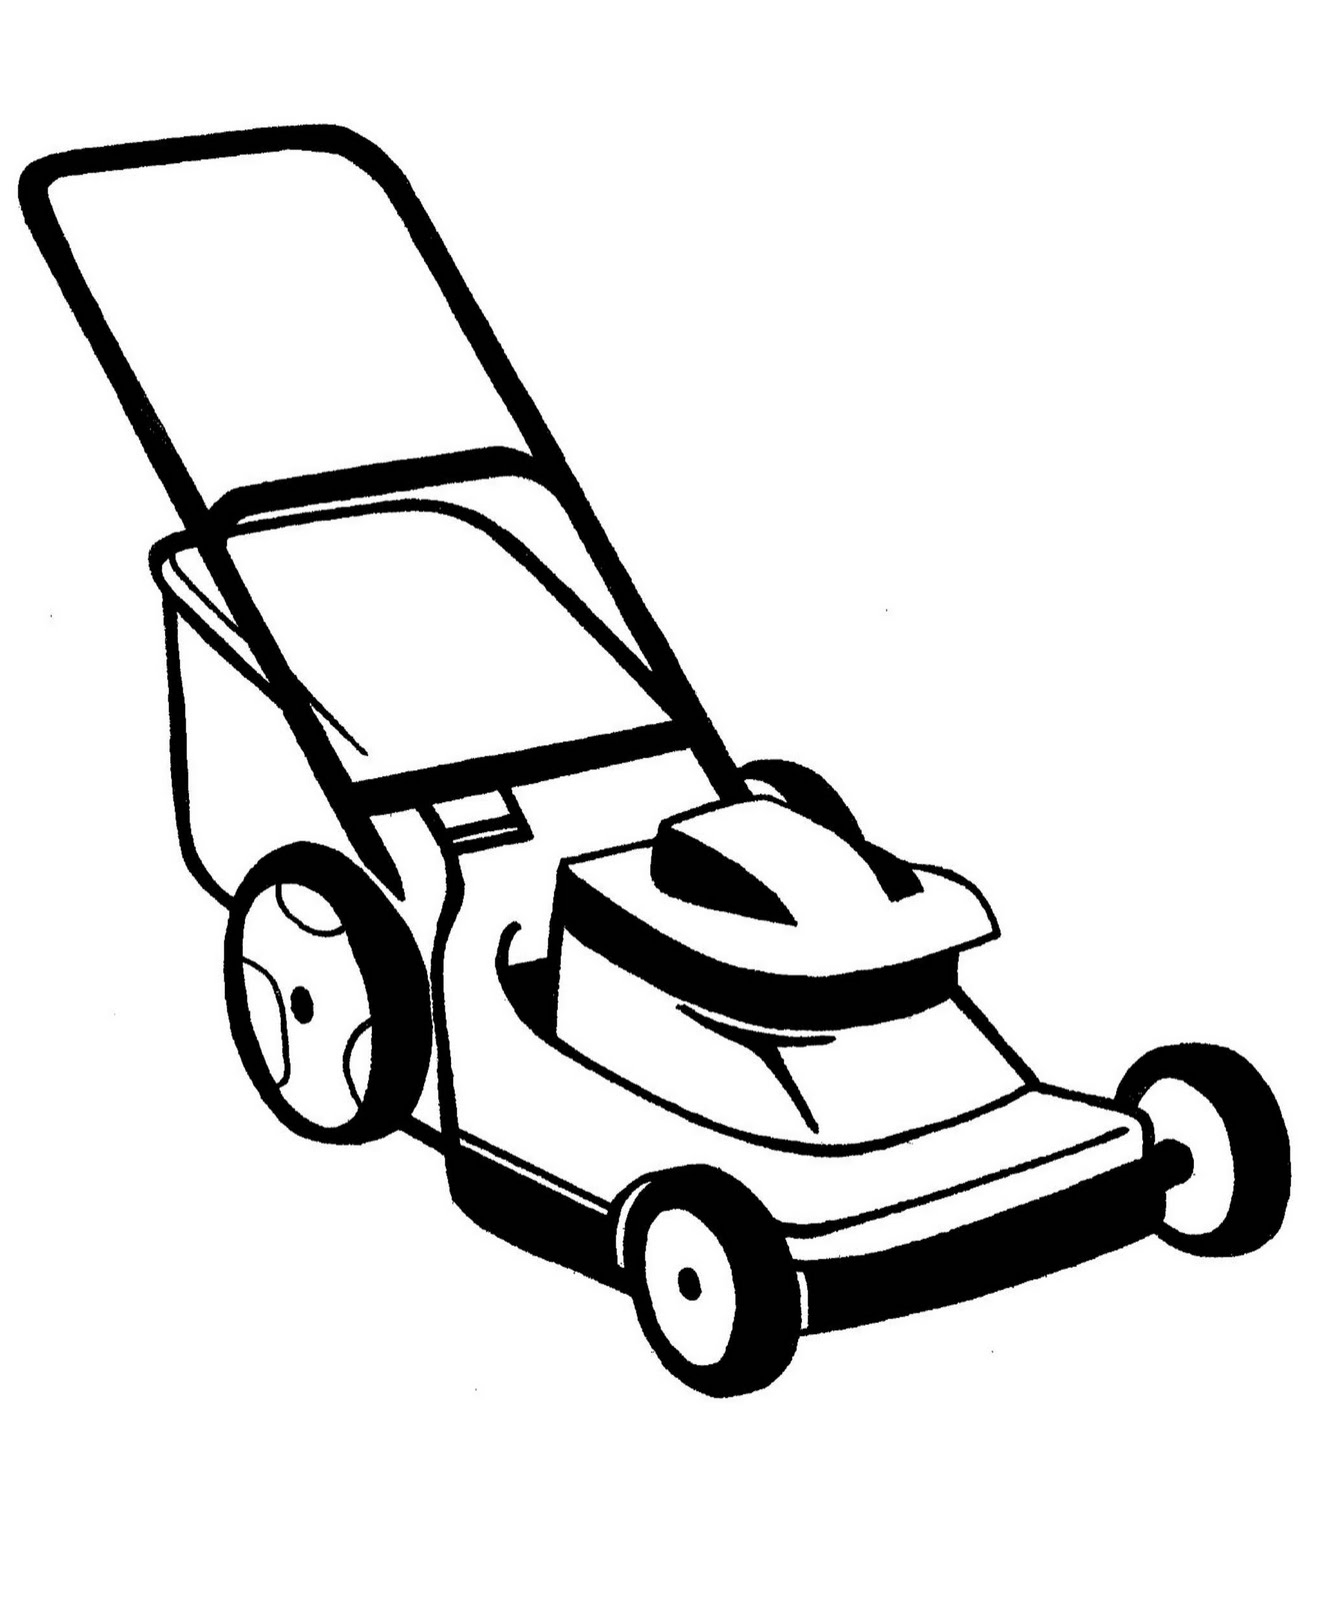 757 Unicorn Lawn Mower Coloring Page with Animal character